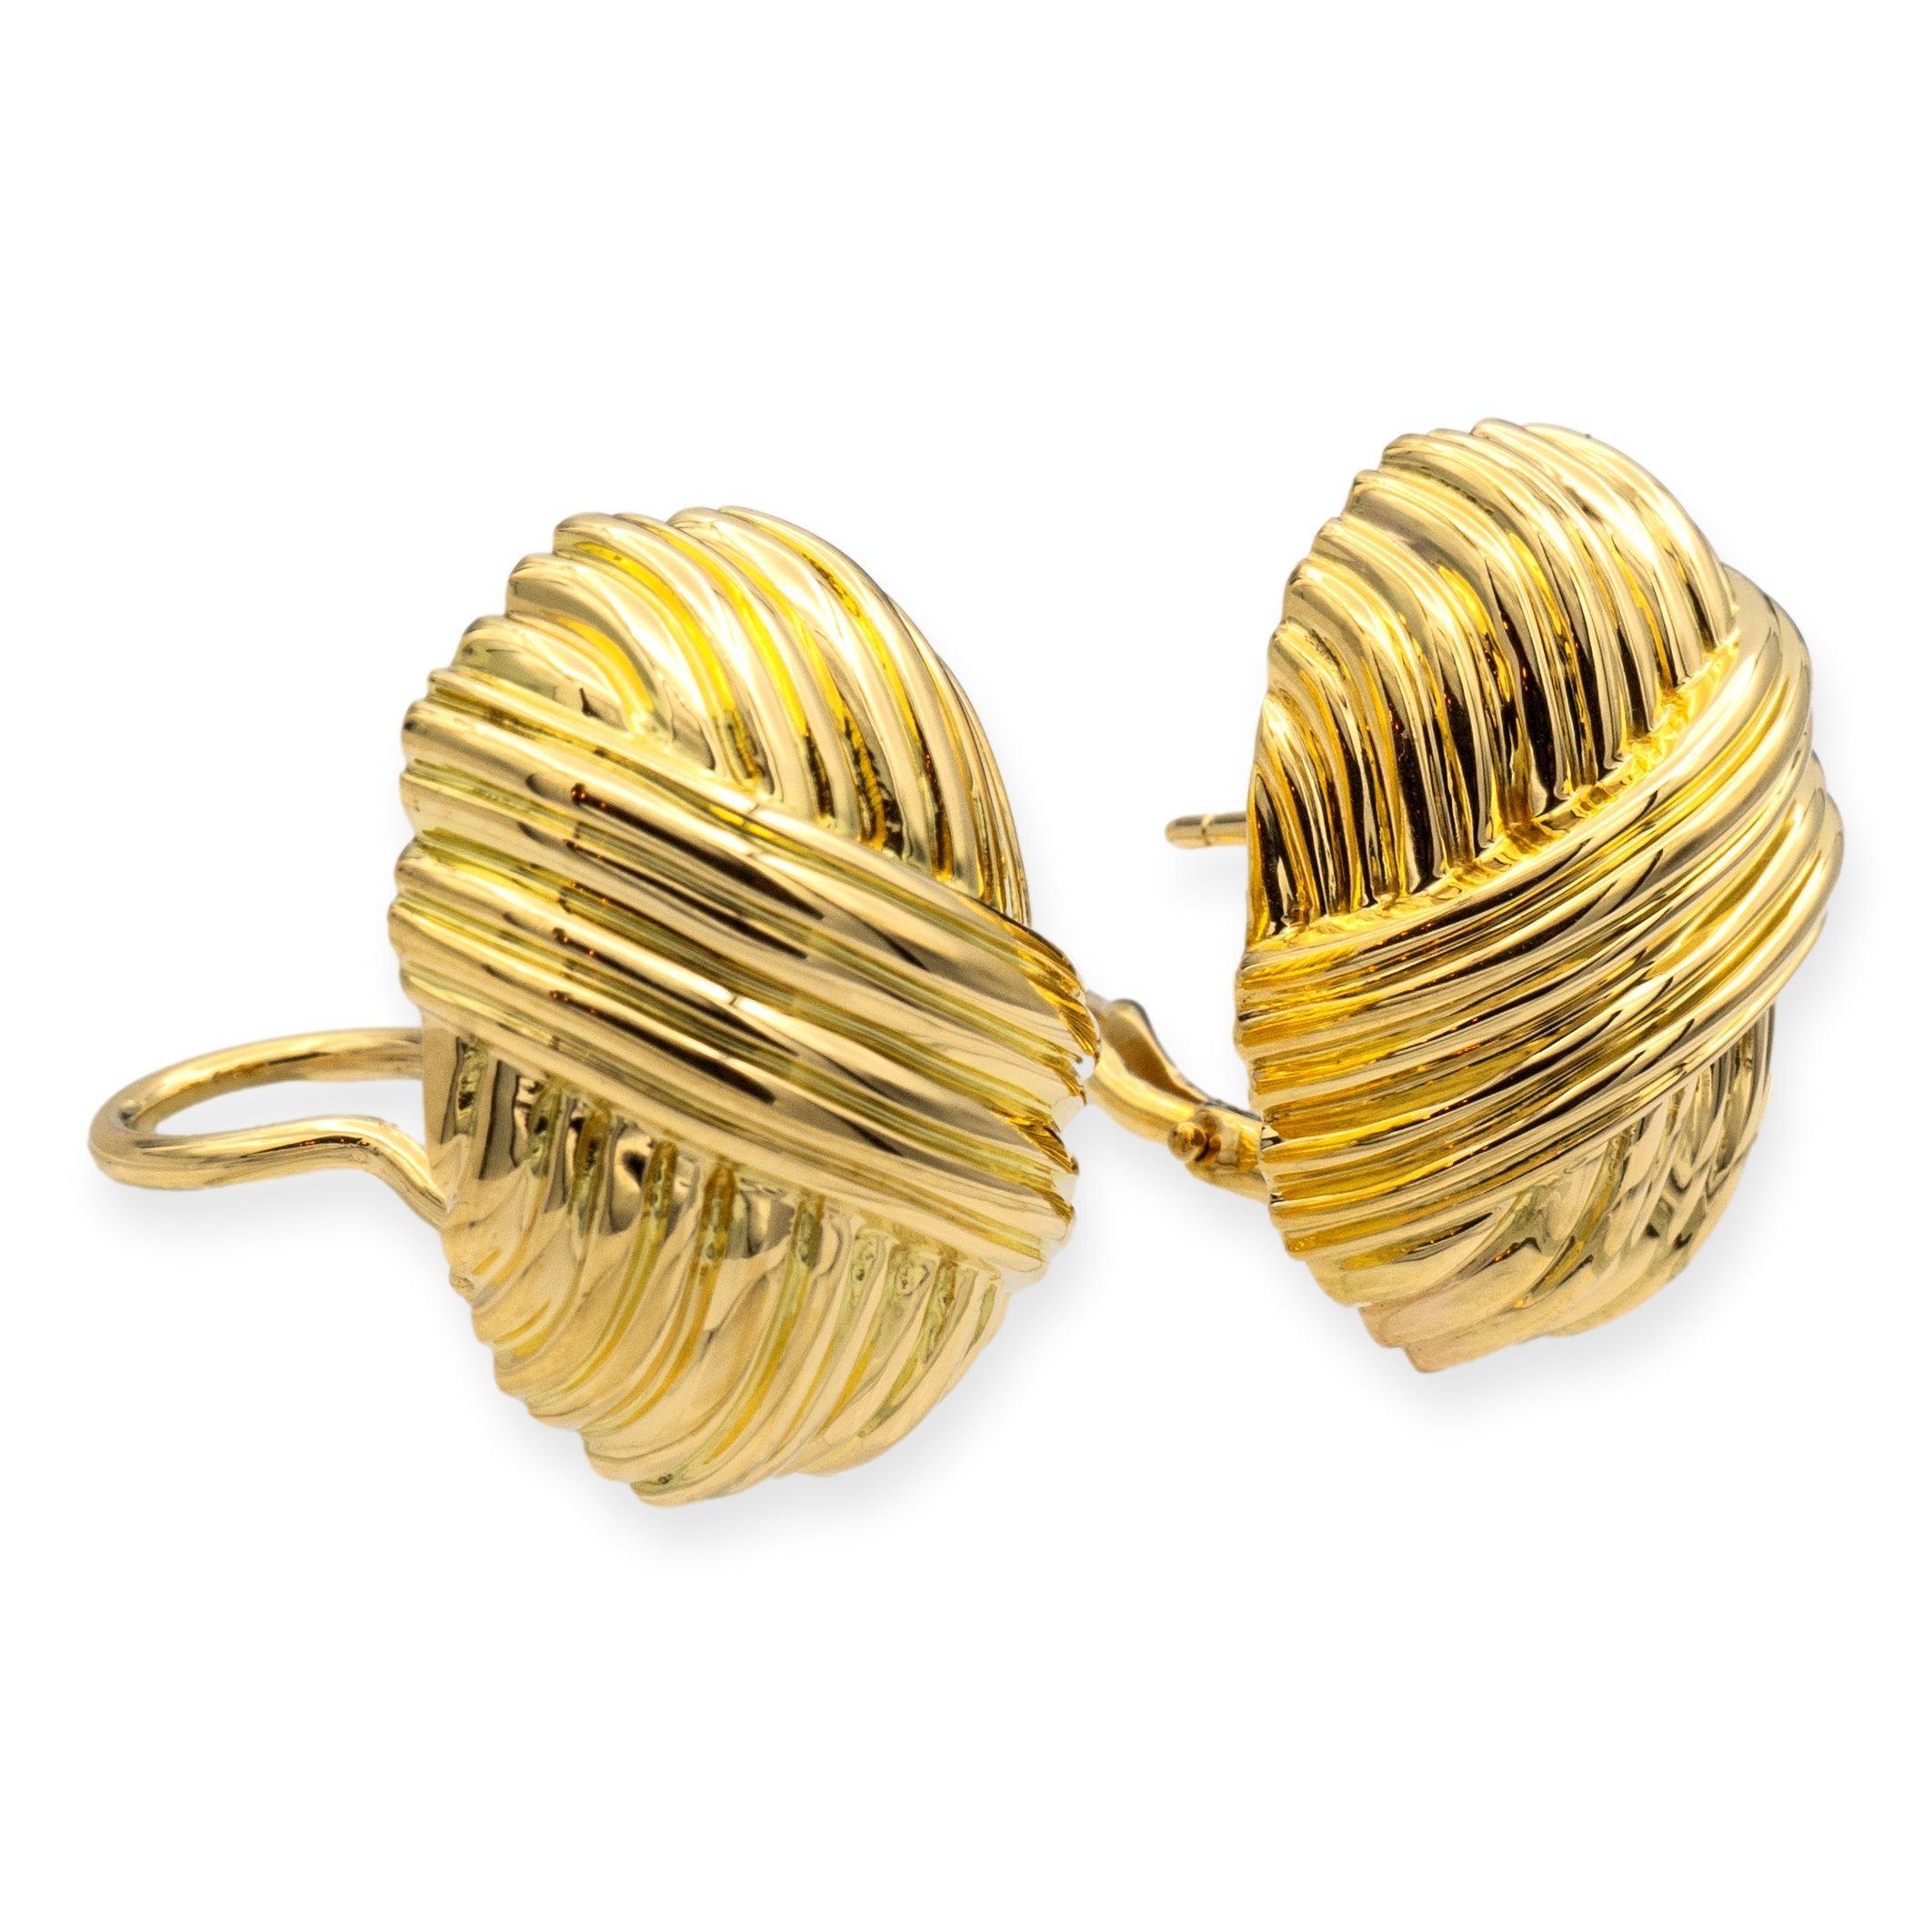 Tiffany & Co. vintage clip-on earrings with posts from the 1980's finely crafted in 18 karat yellow gold with large omega backs. 
Fully hallmarked with logo and metal content.

Earrings Specifications
Brand: Tiffany & Co.
Style: Vintage 1980's Clip-